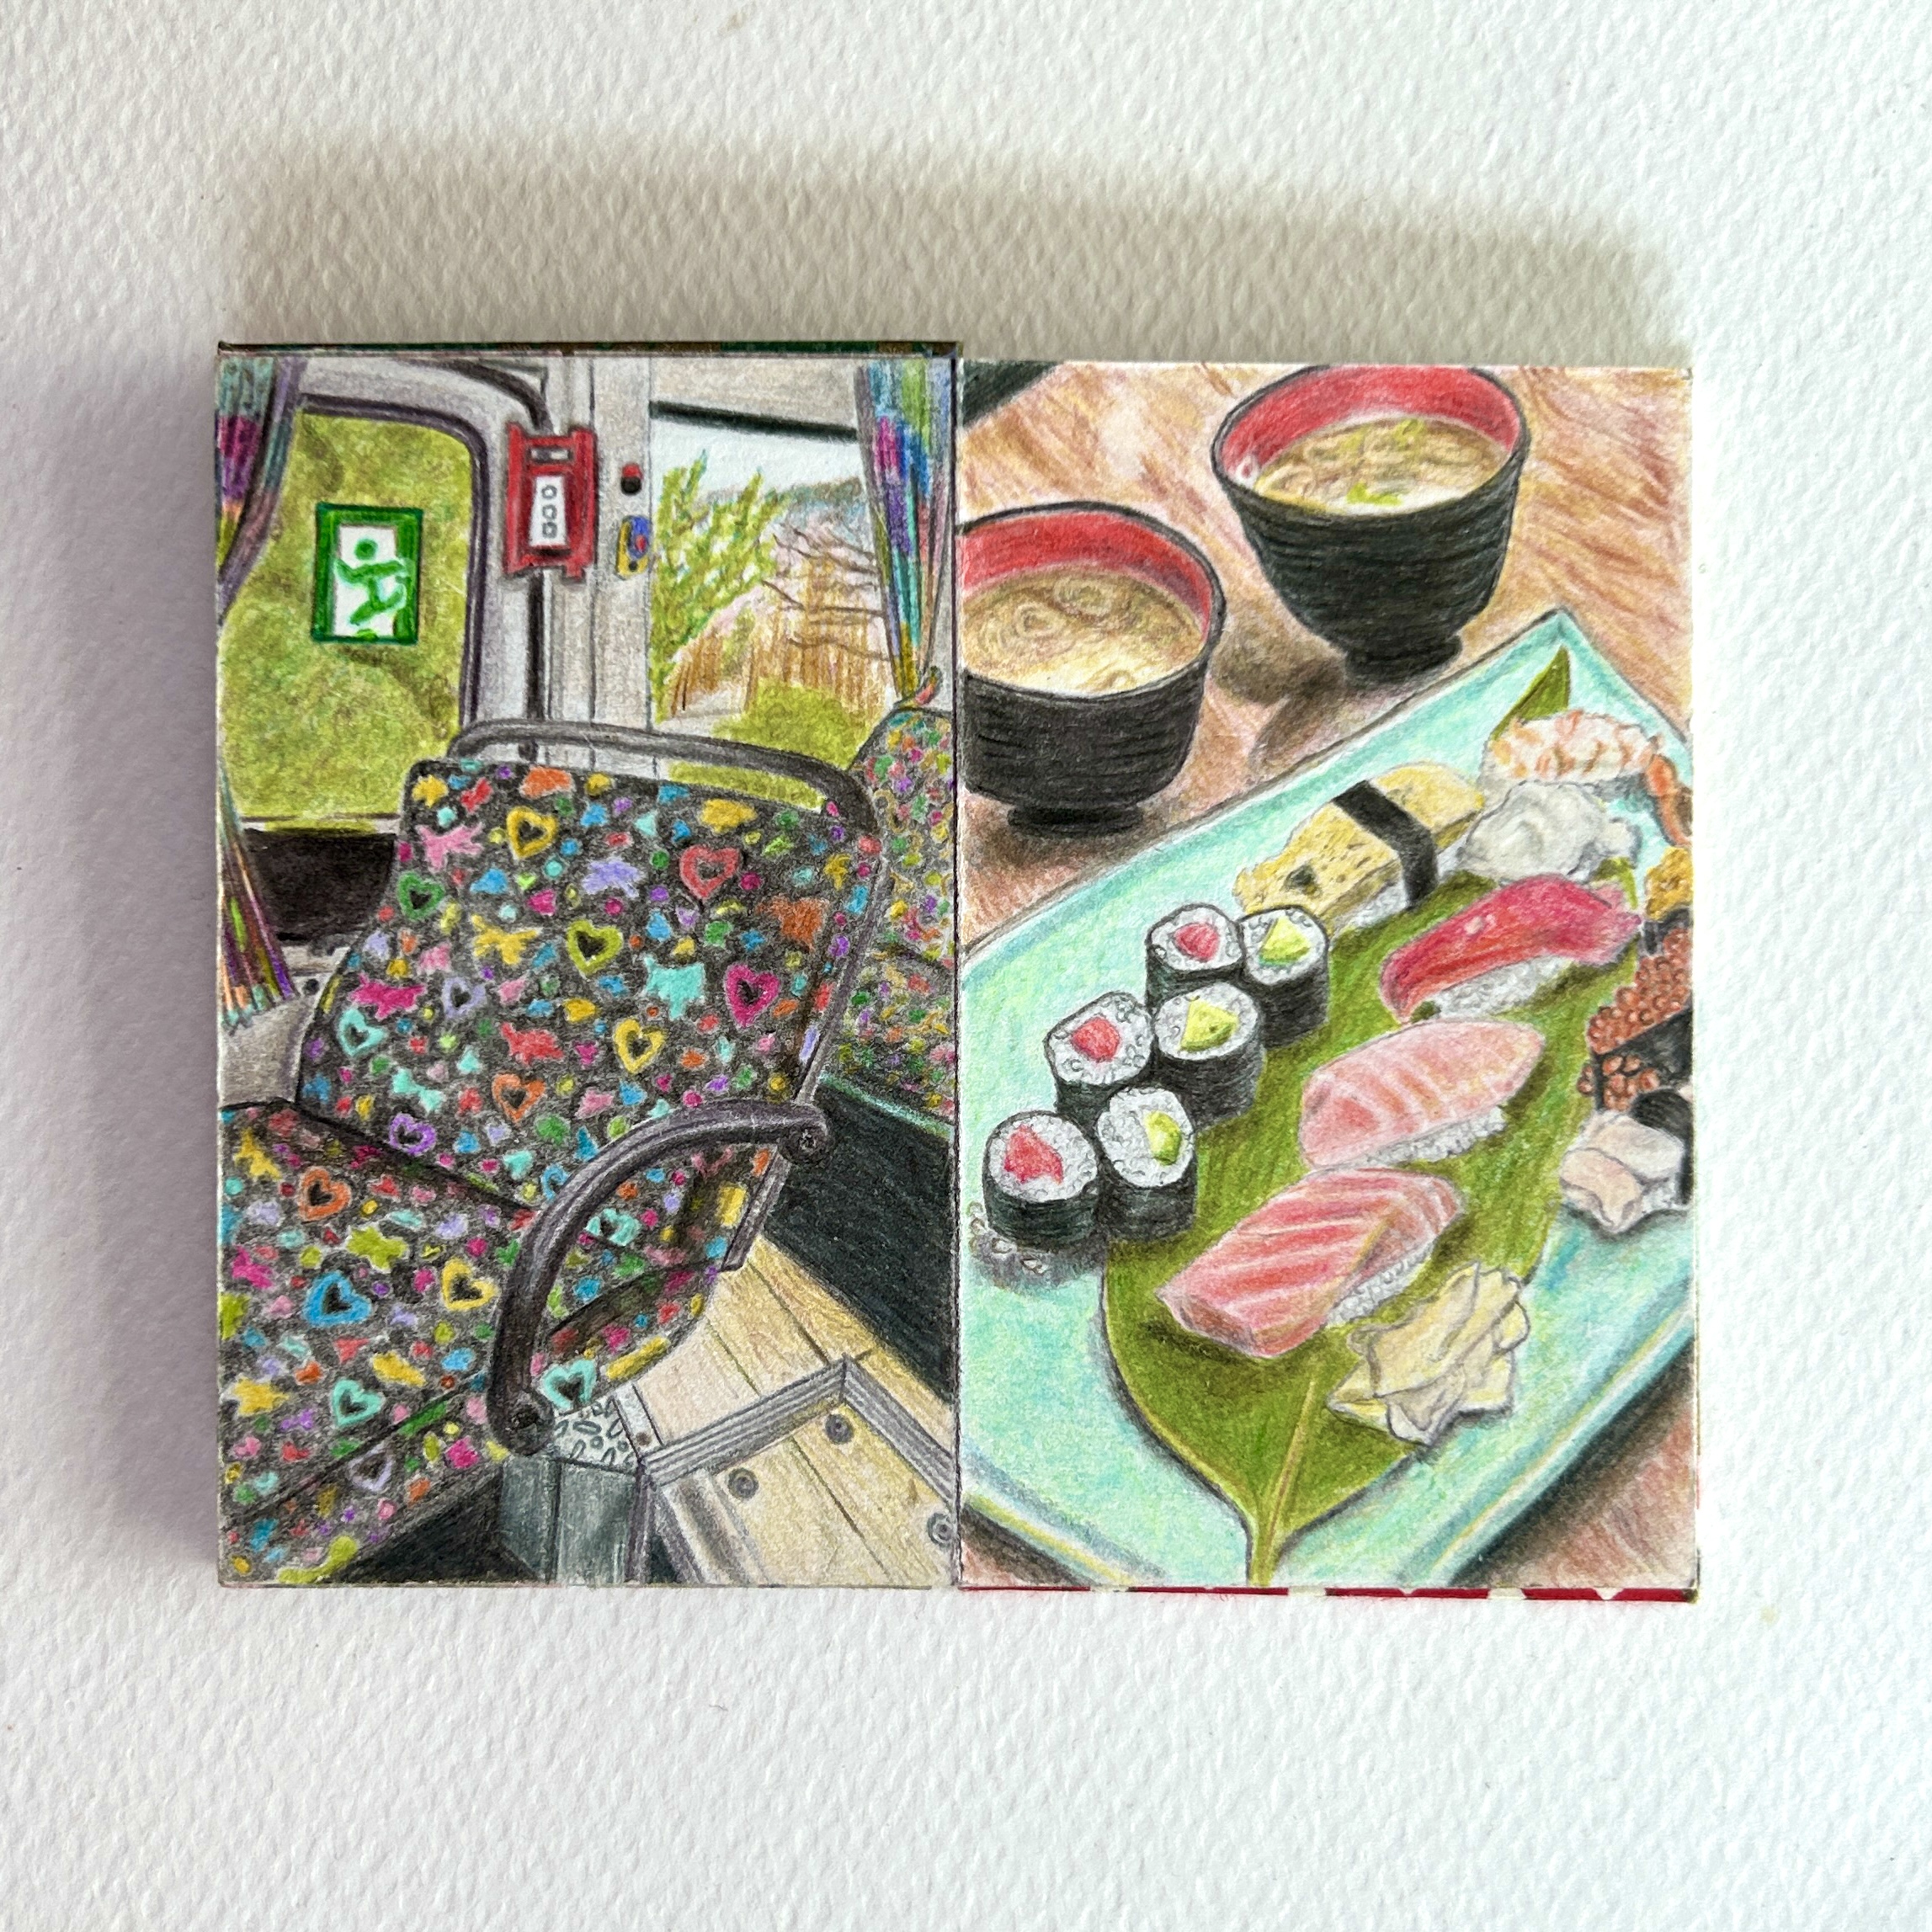 two colour pencil drawings, one of a chair in a bus seen in Fuji Kawaguchiko, Japan; the other, a plate of sushi with bowls of miso soup in Tokyo, Japan